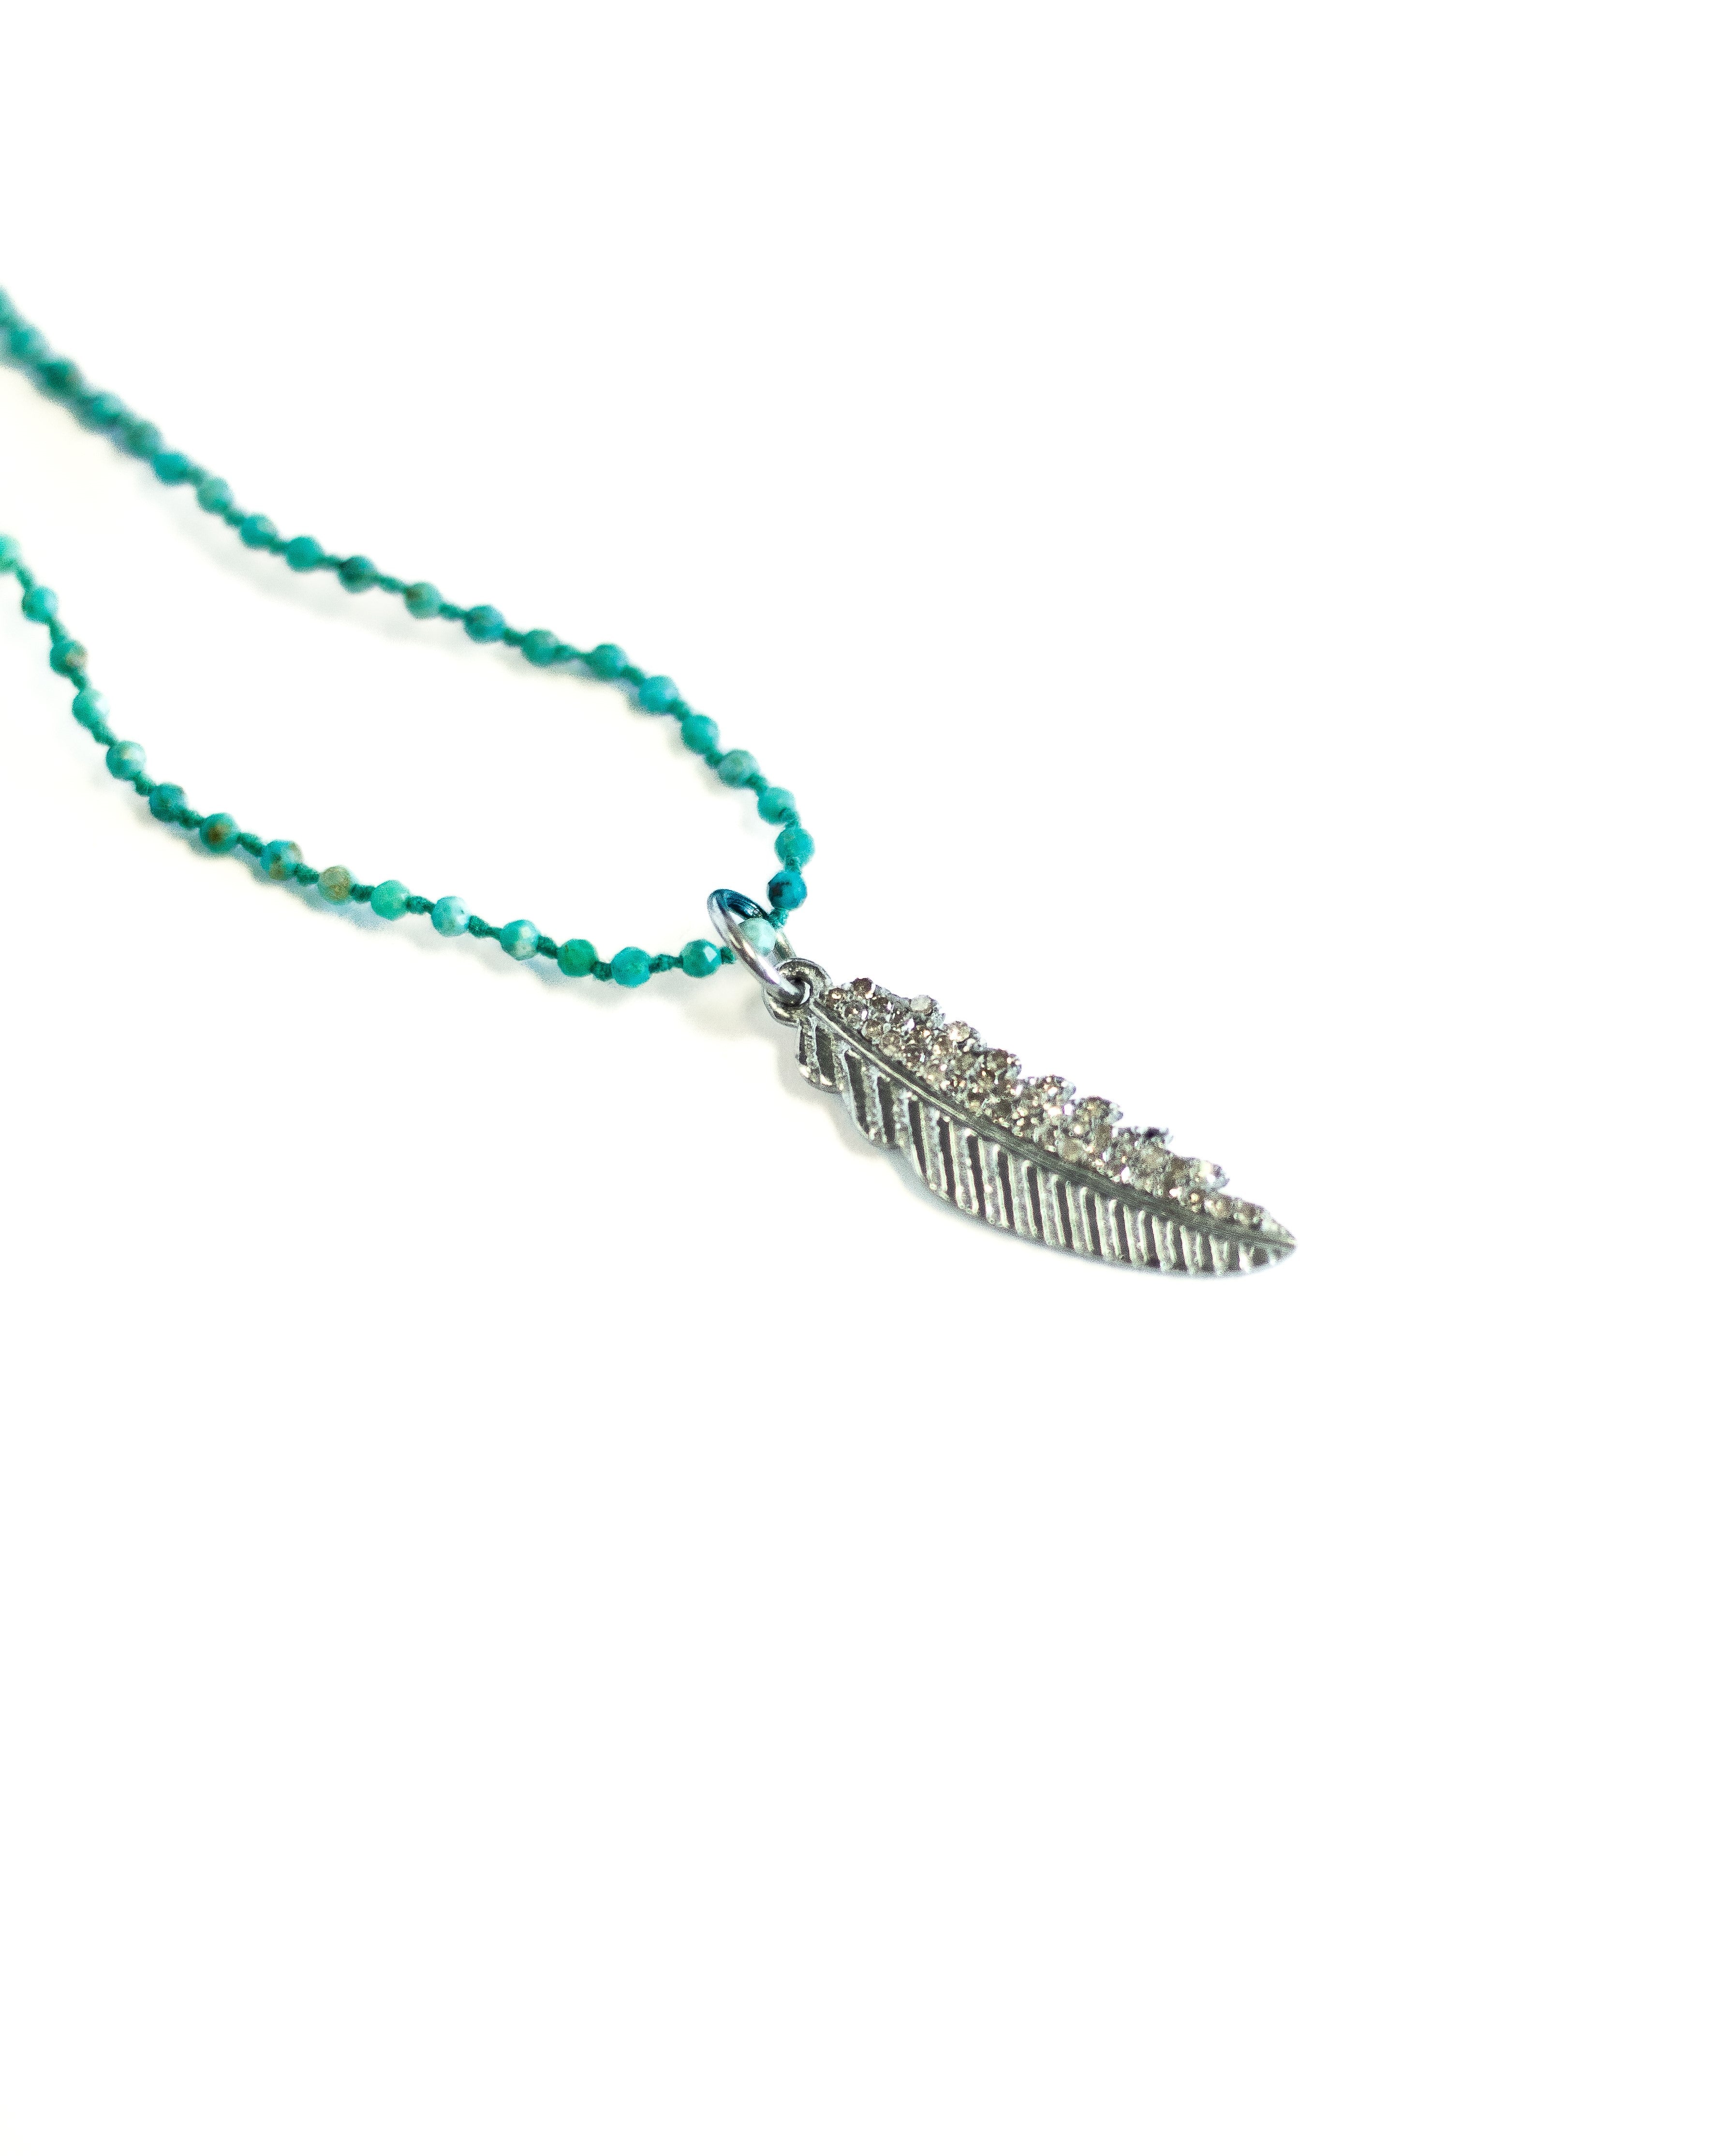 Turquoise & Diamond Feather Necklace by Art Of Ceremony